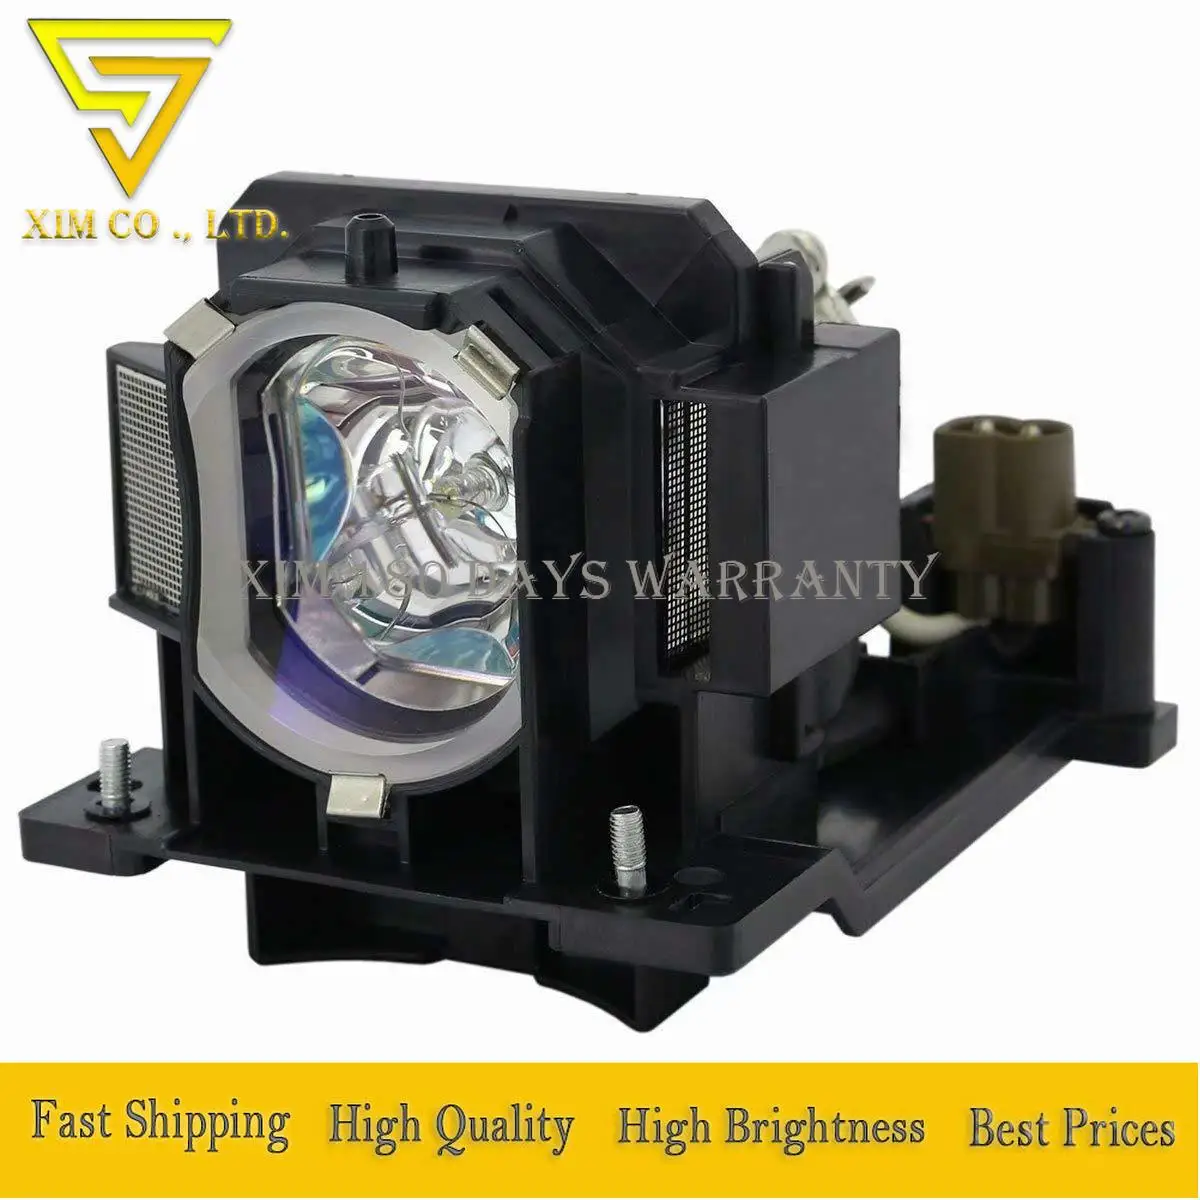 DT01091 Projector Lamp For Hitachi CP-AW100N CP-D10 CP-DW10 ED-AW100N ED-AW110N HCP-Q3 HCP-Q3W CP-DW1 high quality With Housing dt01091 projector lamp for hitachi cp aw100n cp d10 cp dw10 ed aw100n ed aw110n hcp q3 hcp q3w cp dw1 high quality with housing